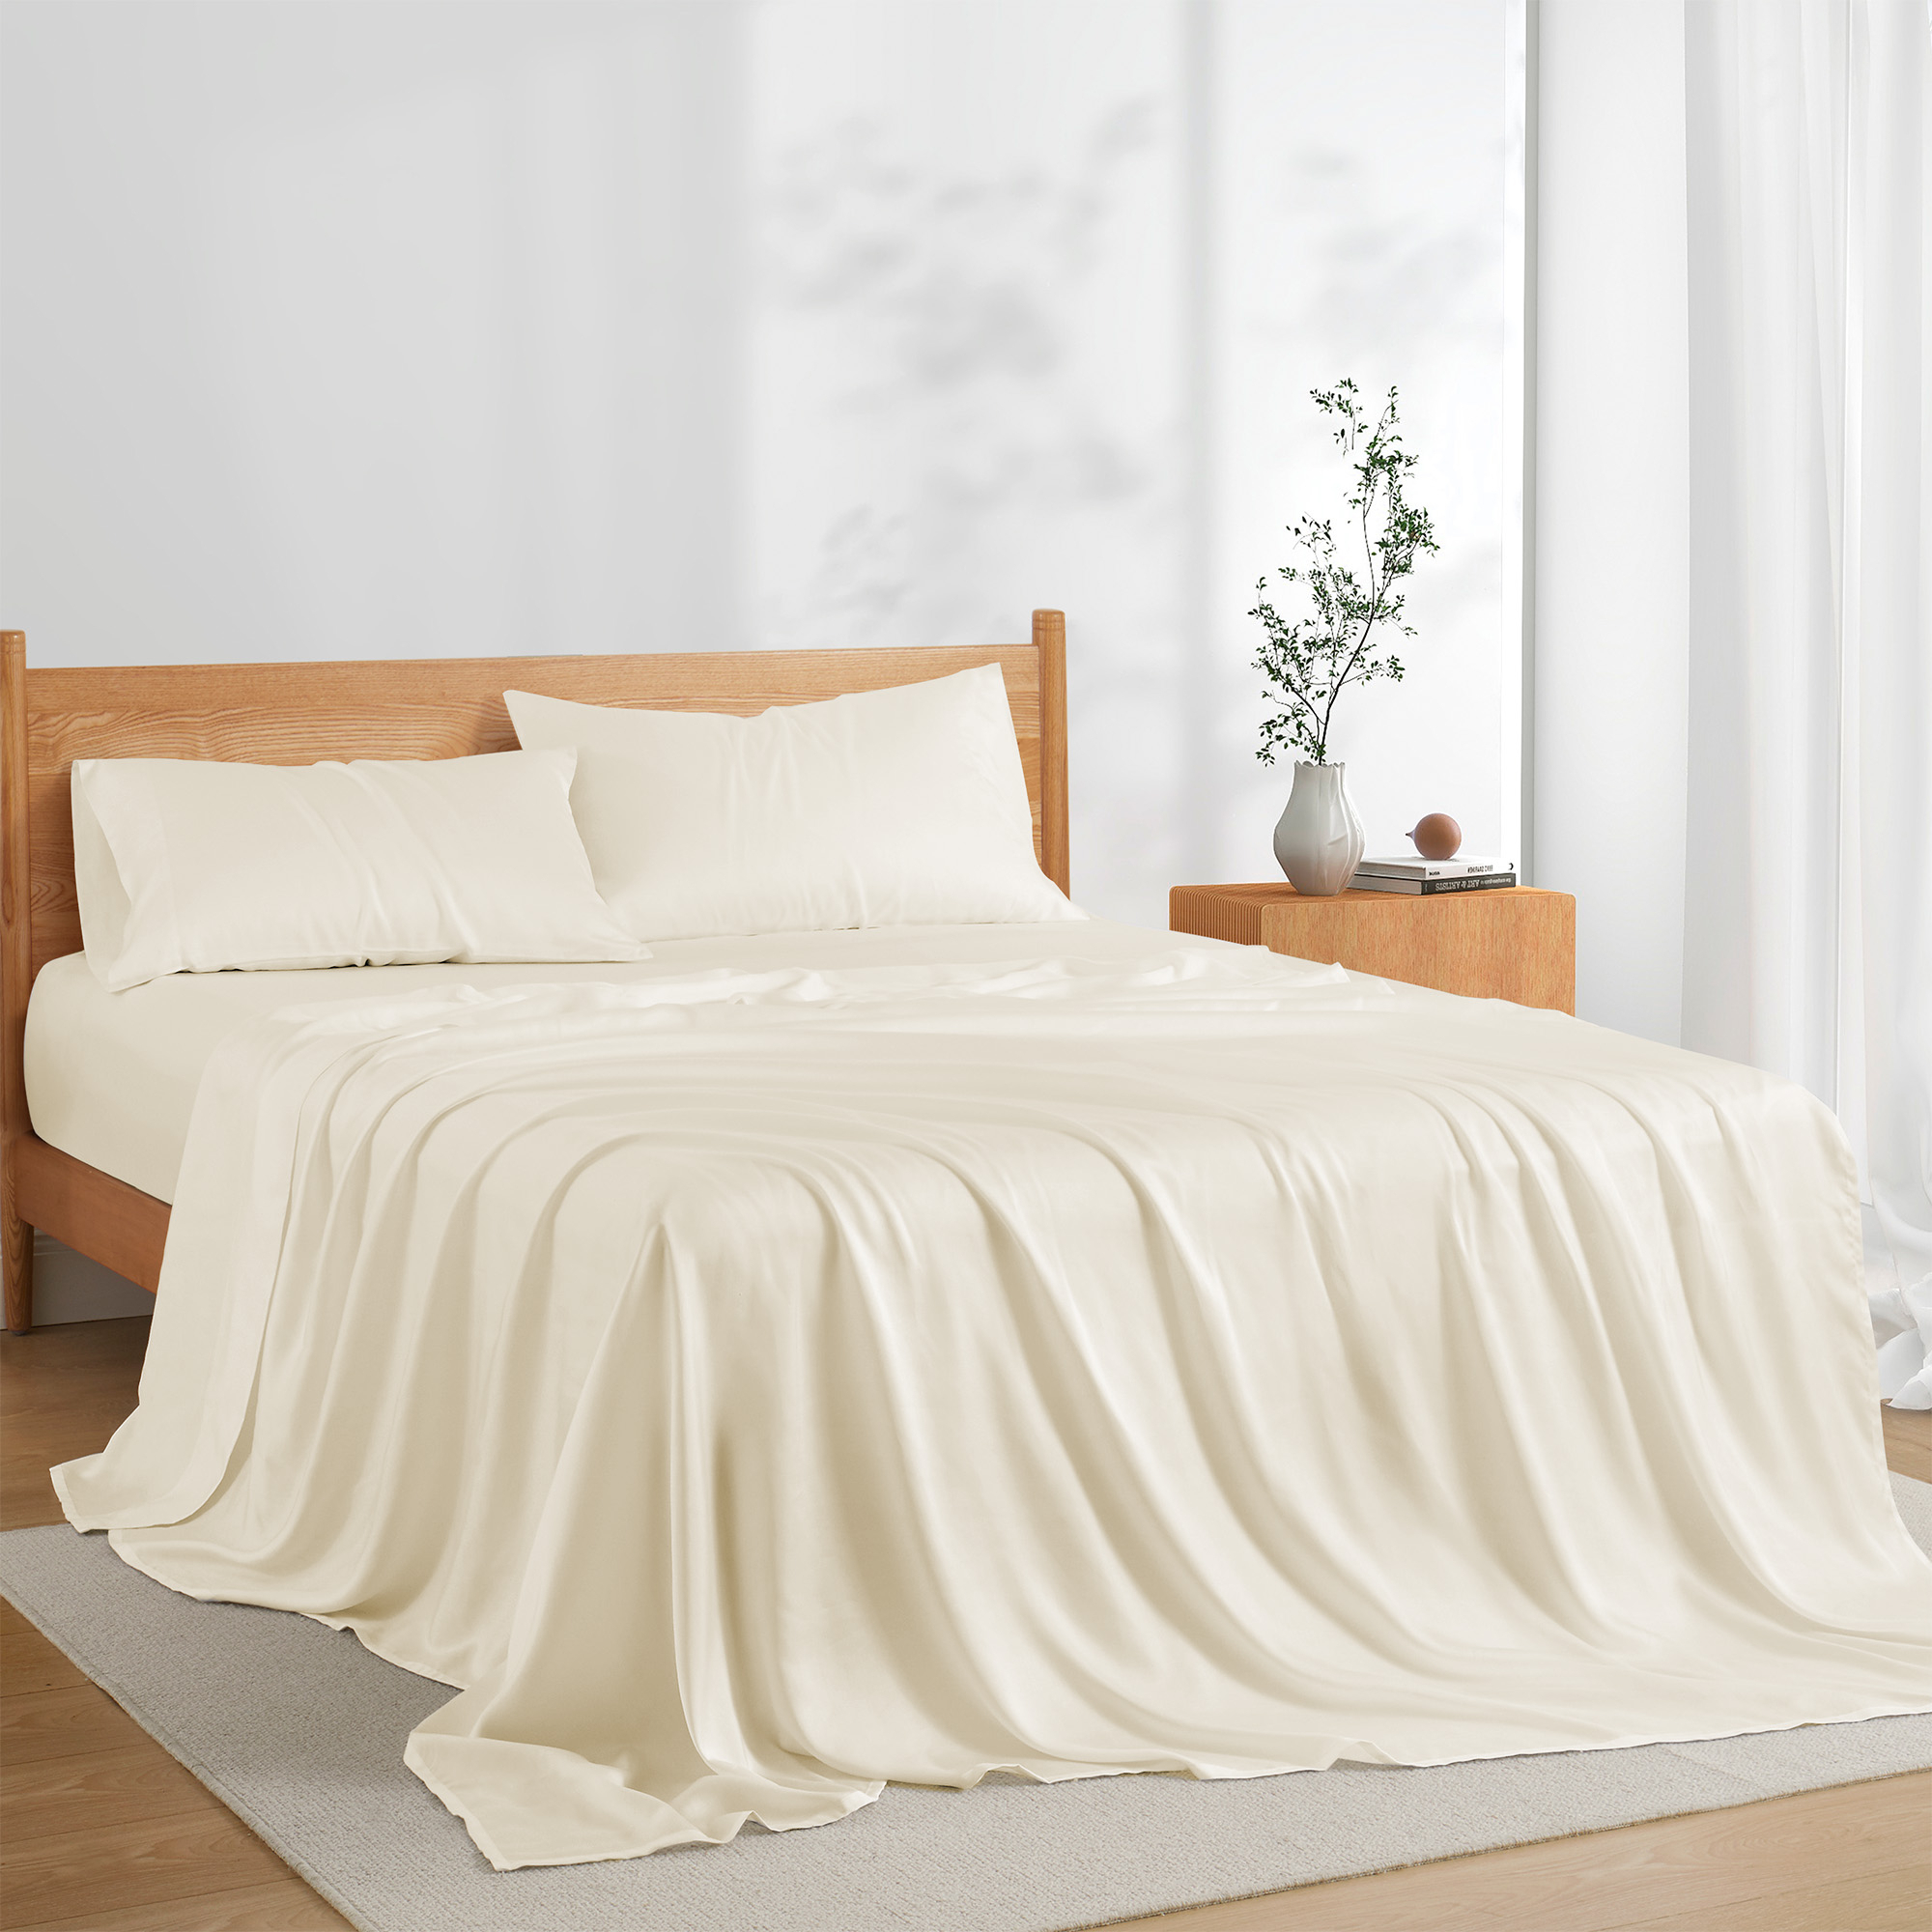 Naturally Cooling, Soft, And Breathable Tencel Lyocell 4Pc Sheets Set - Full Size